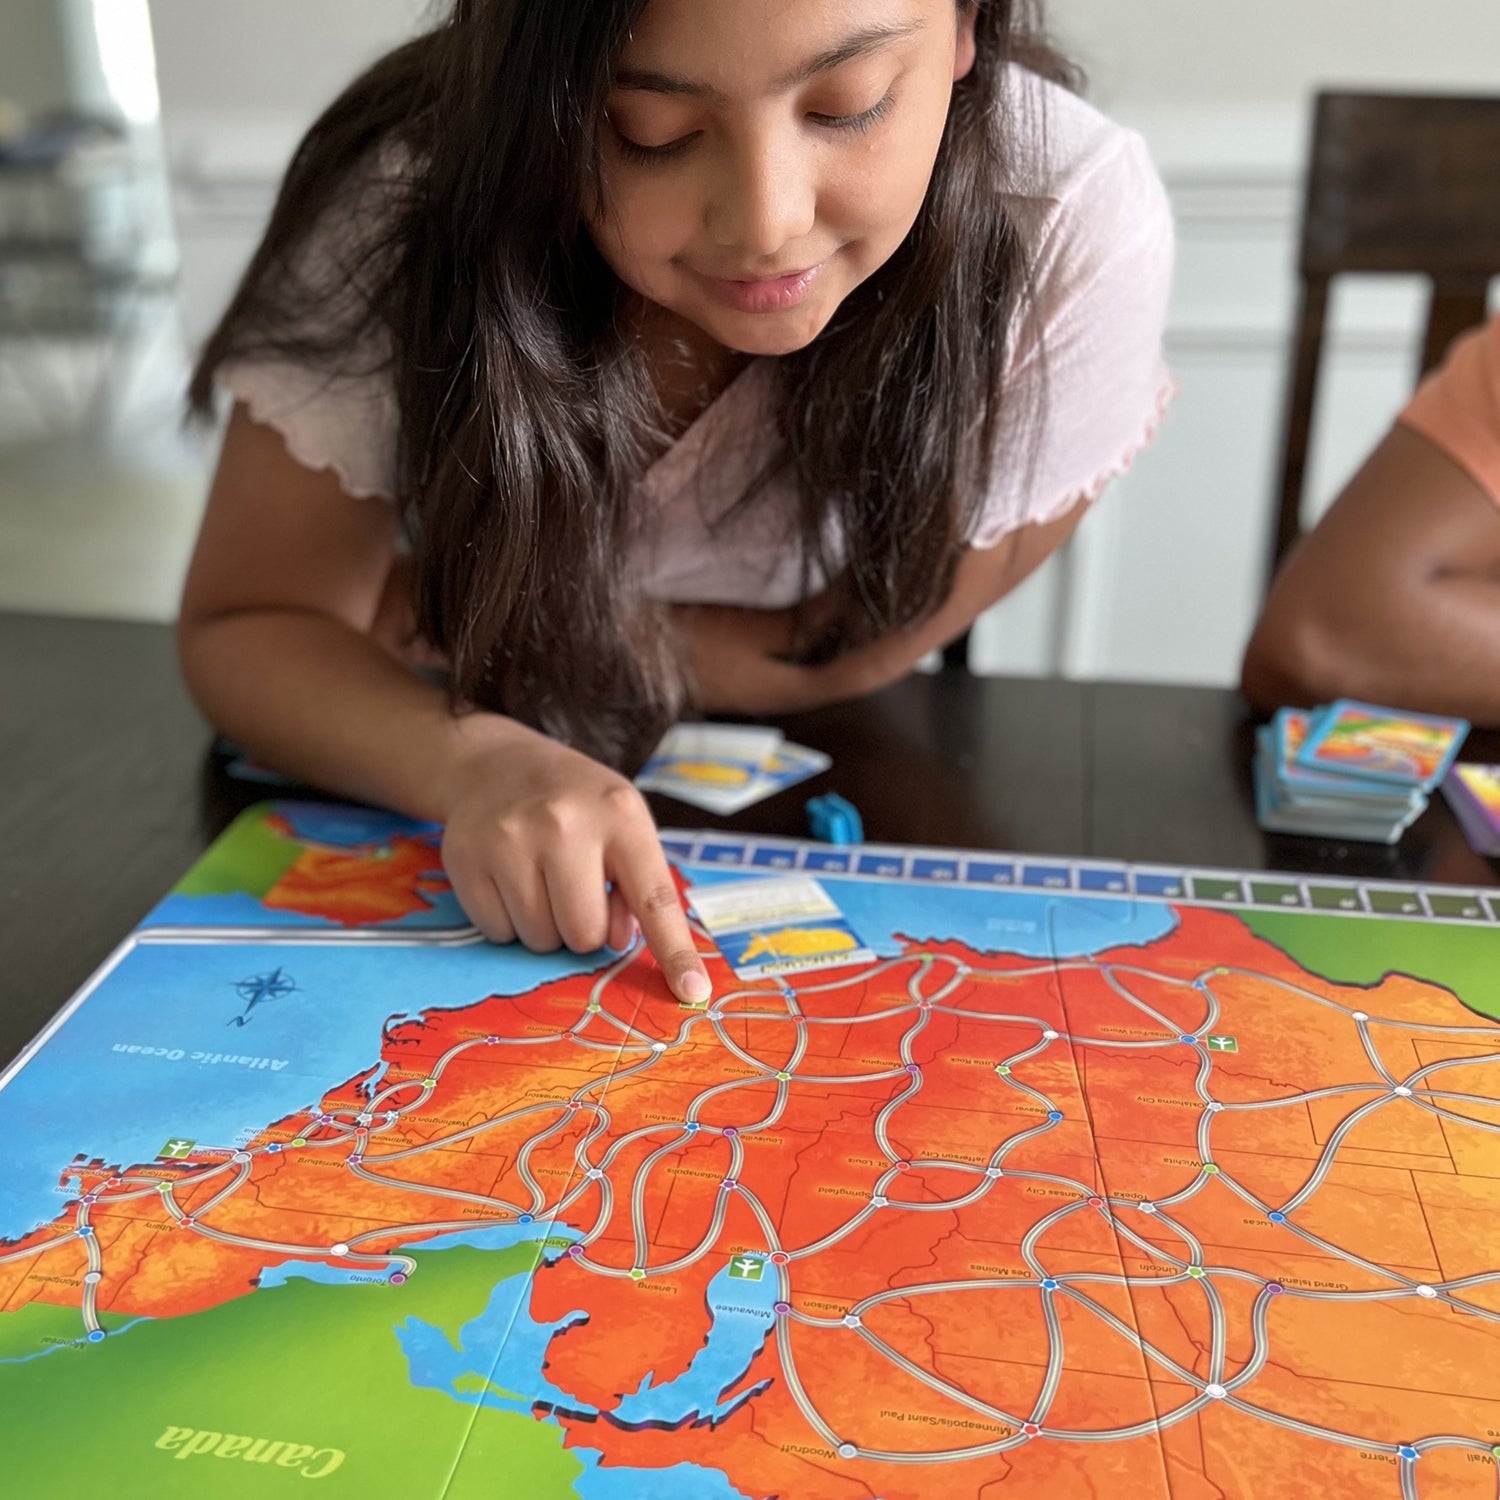 Let's Drive by SimplyFun is a fun geography game that teaches state facts about the USA.